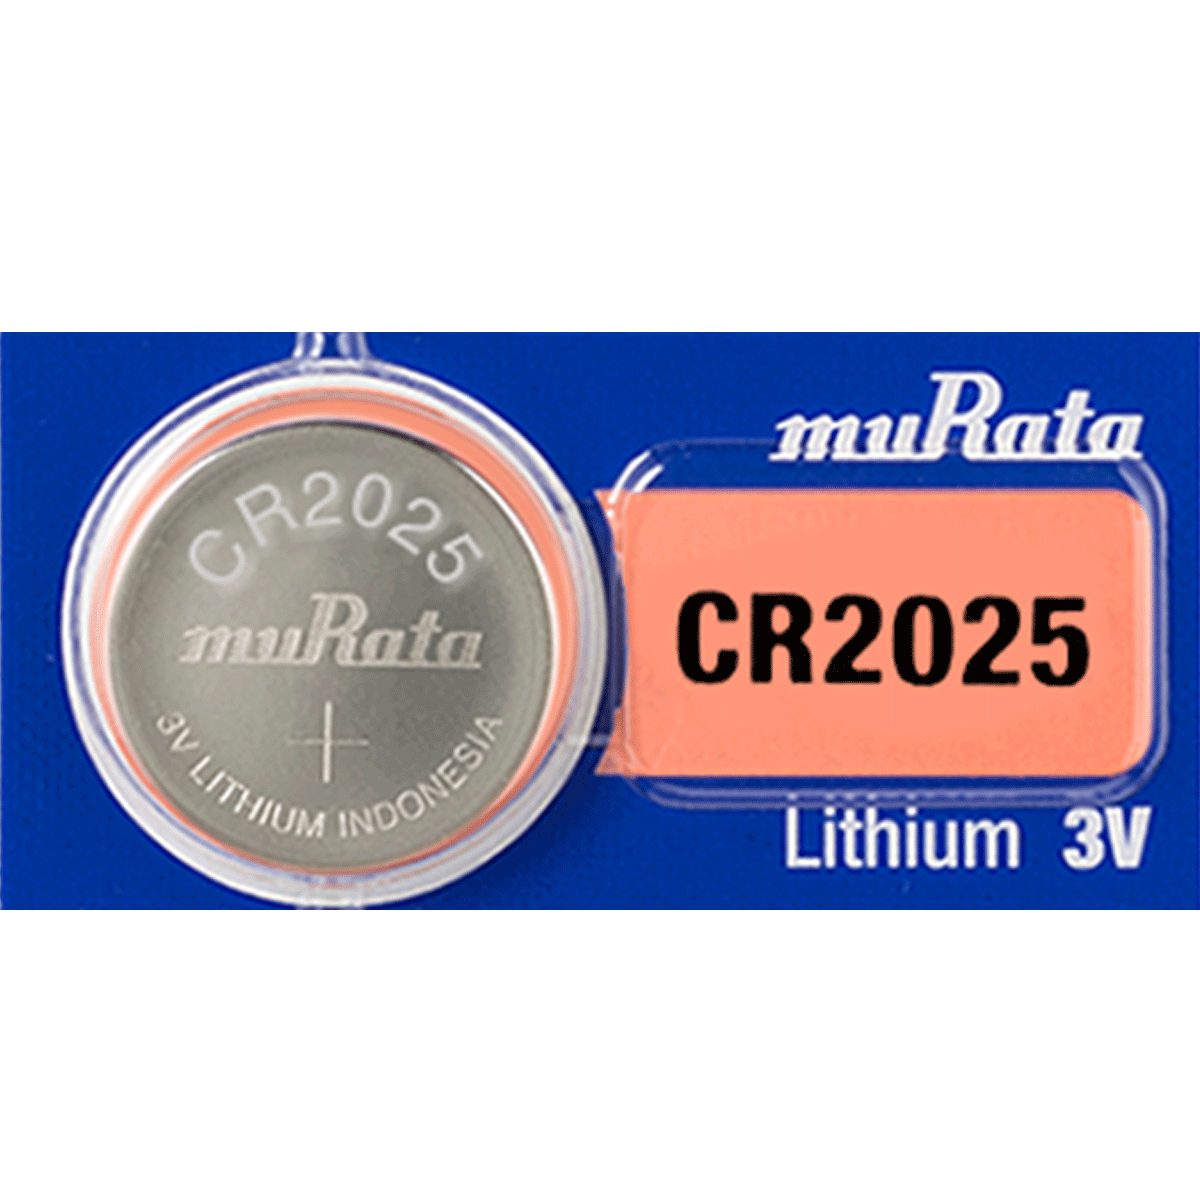 Murata CR2025 Battery 3V Lithium Coin Cell (1PC) (formerly SONY)